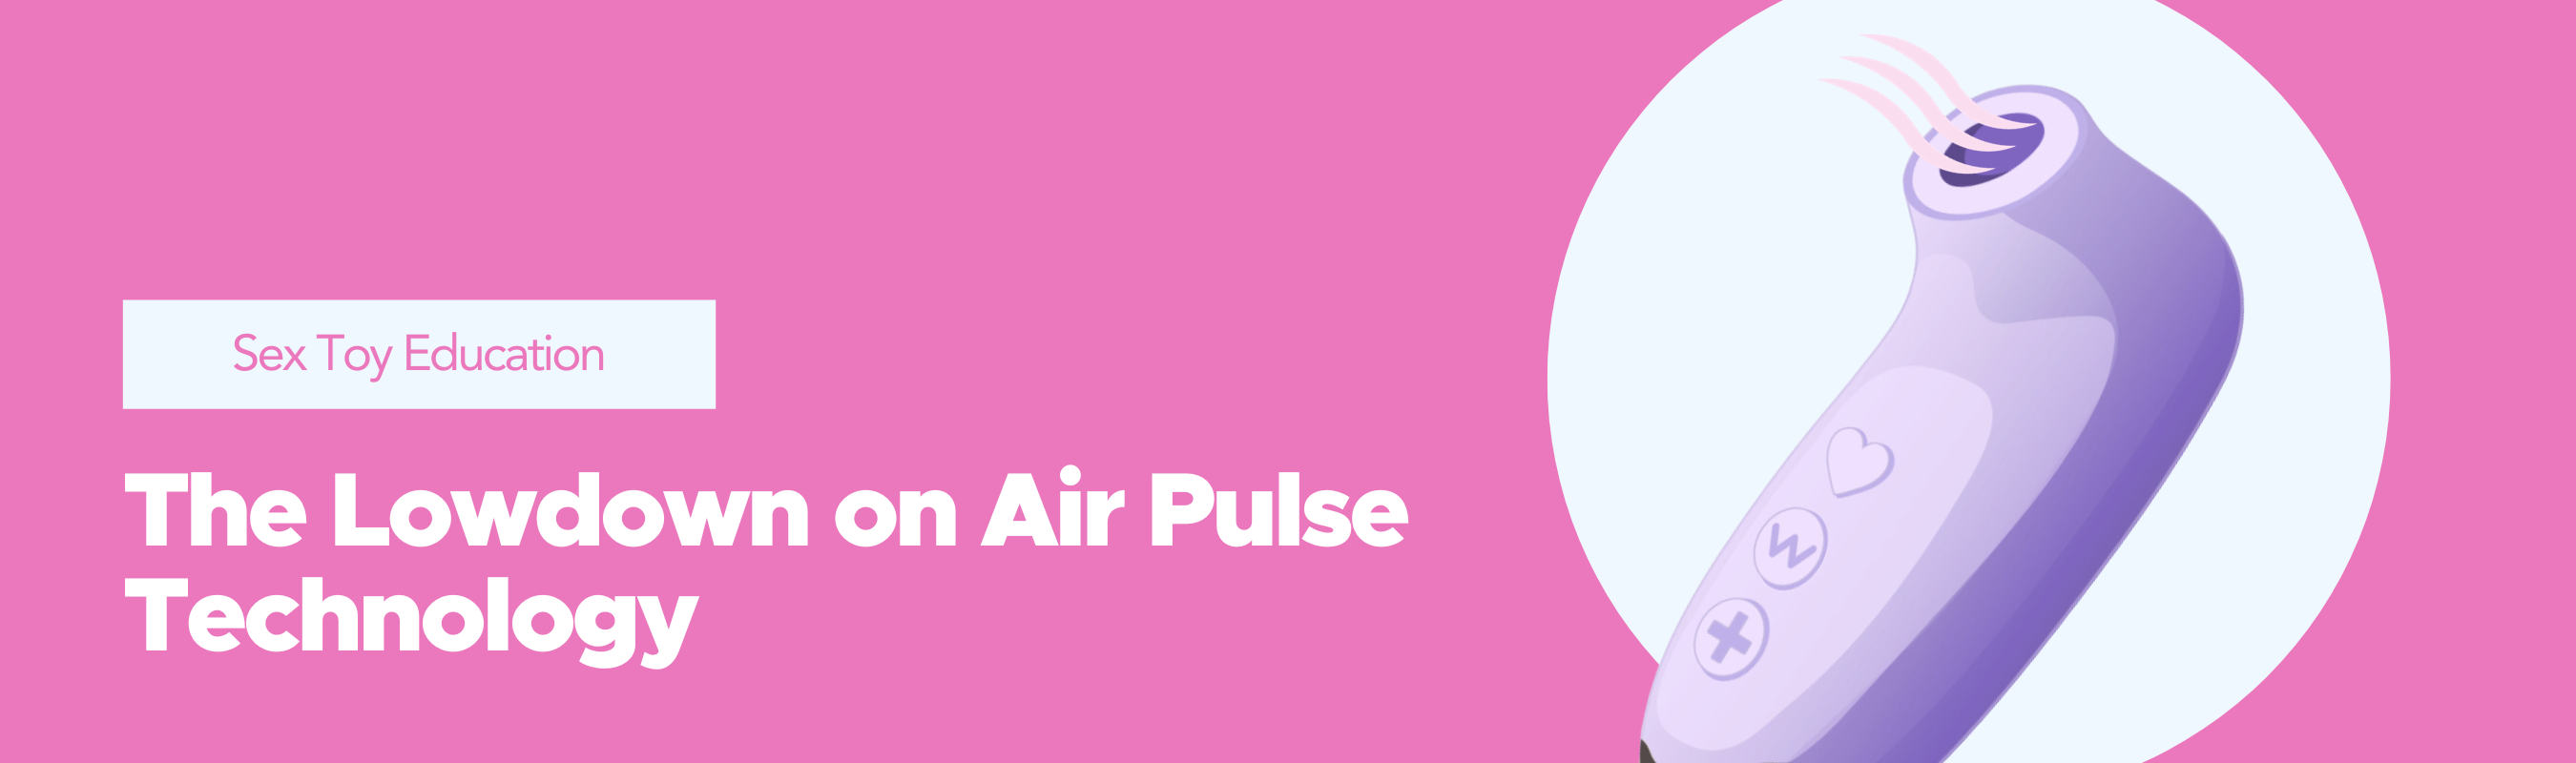 Learn about the lowdown on air pulse sex toy technology